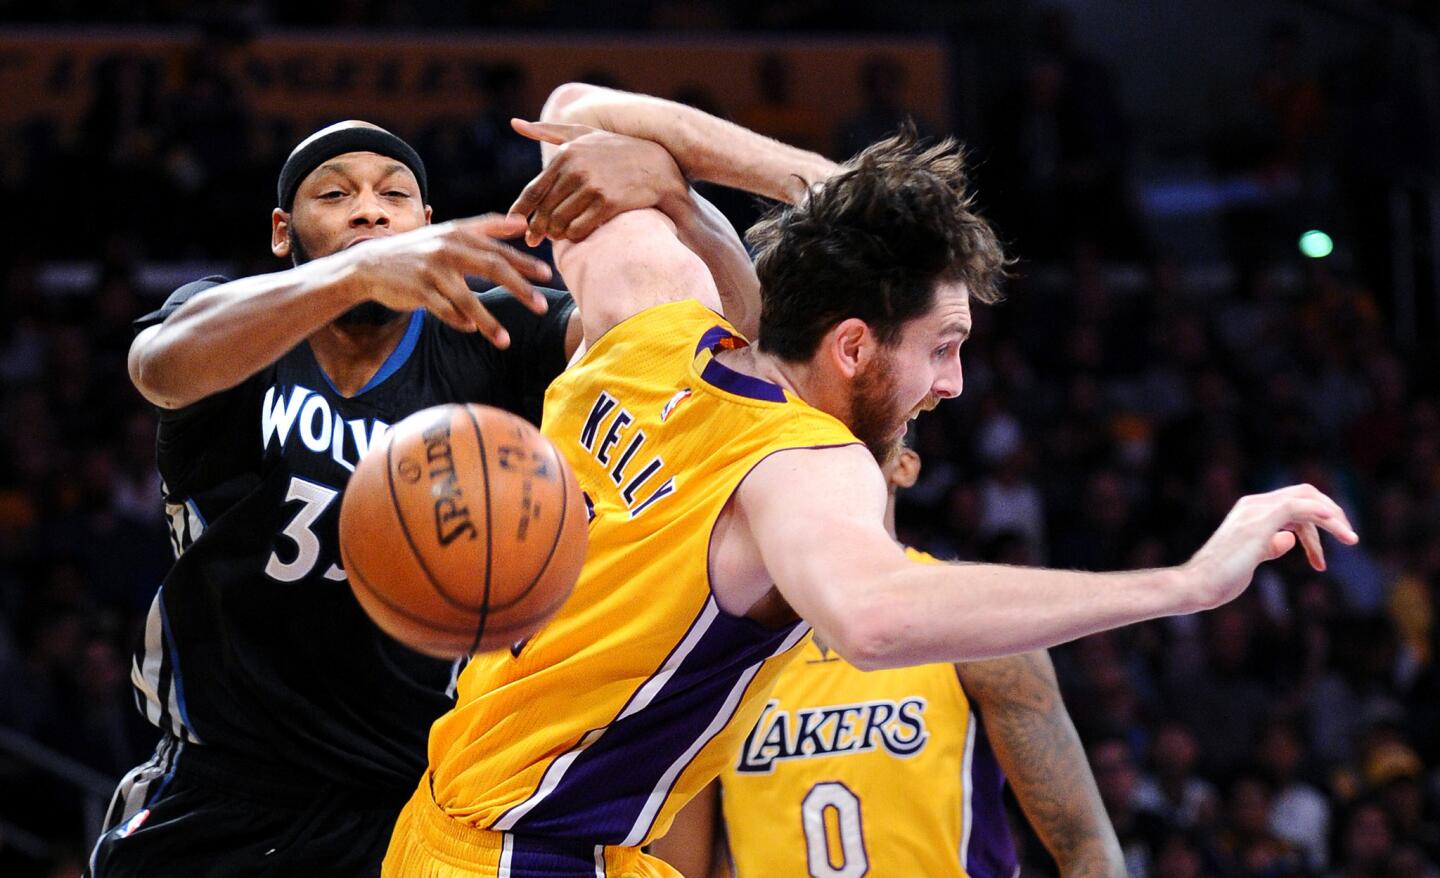 Lakers forward Ryan Kelly and Timberwolves forward Adreian Payne battle for a rebound in the first half Wednesday night at Staples Center.